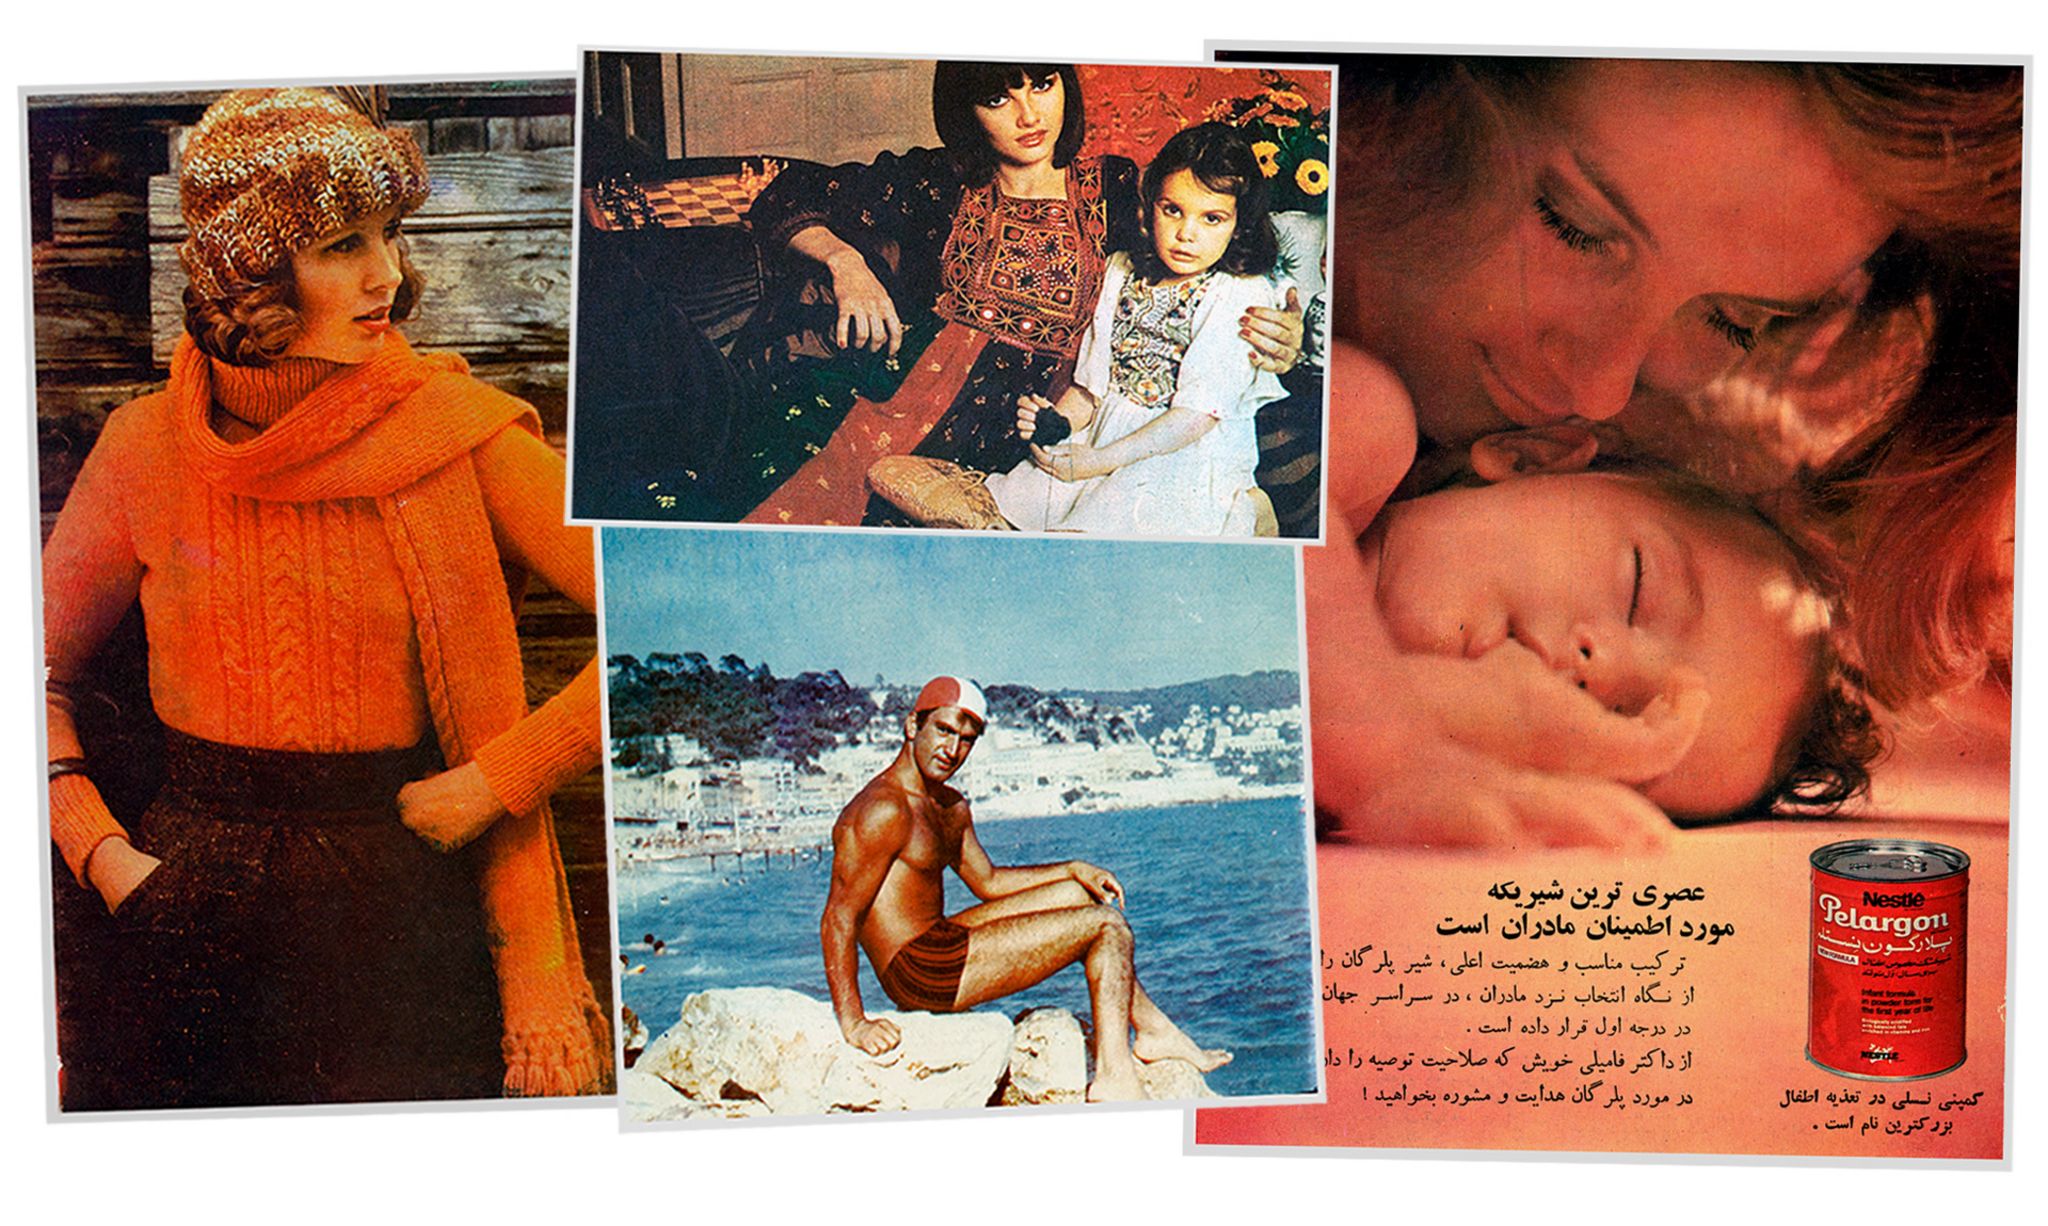 Pages from Afghan magazine Zhvandun - women's fashion photoshoot, man by the sea and baby milk advert